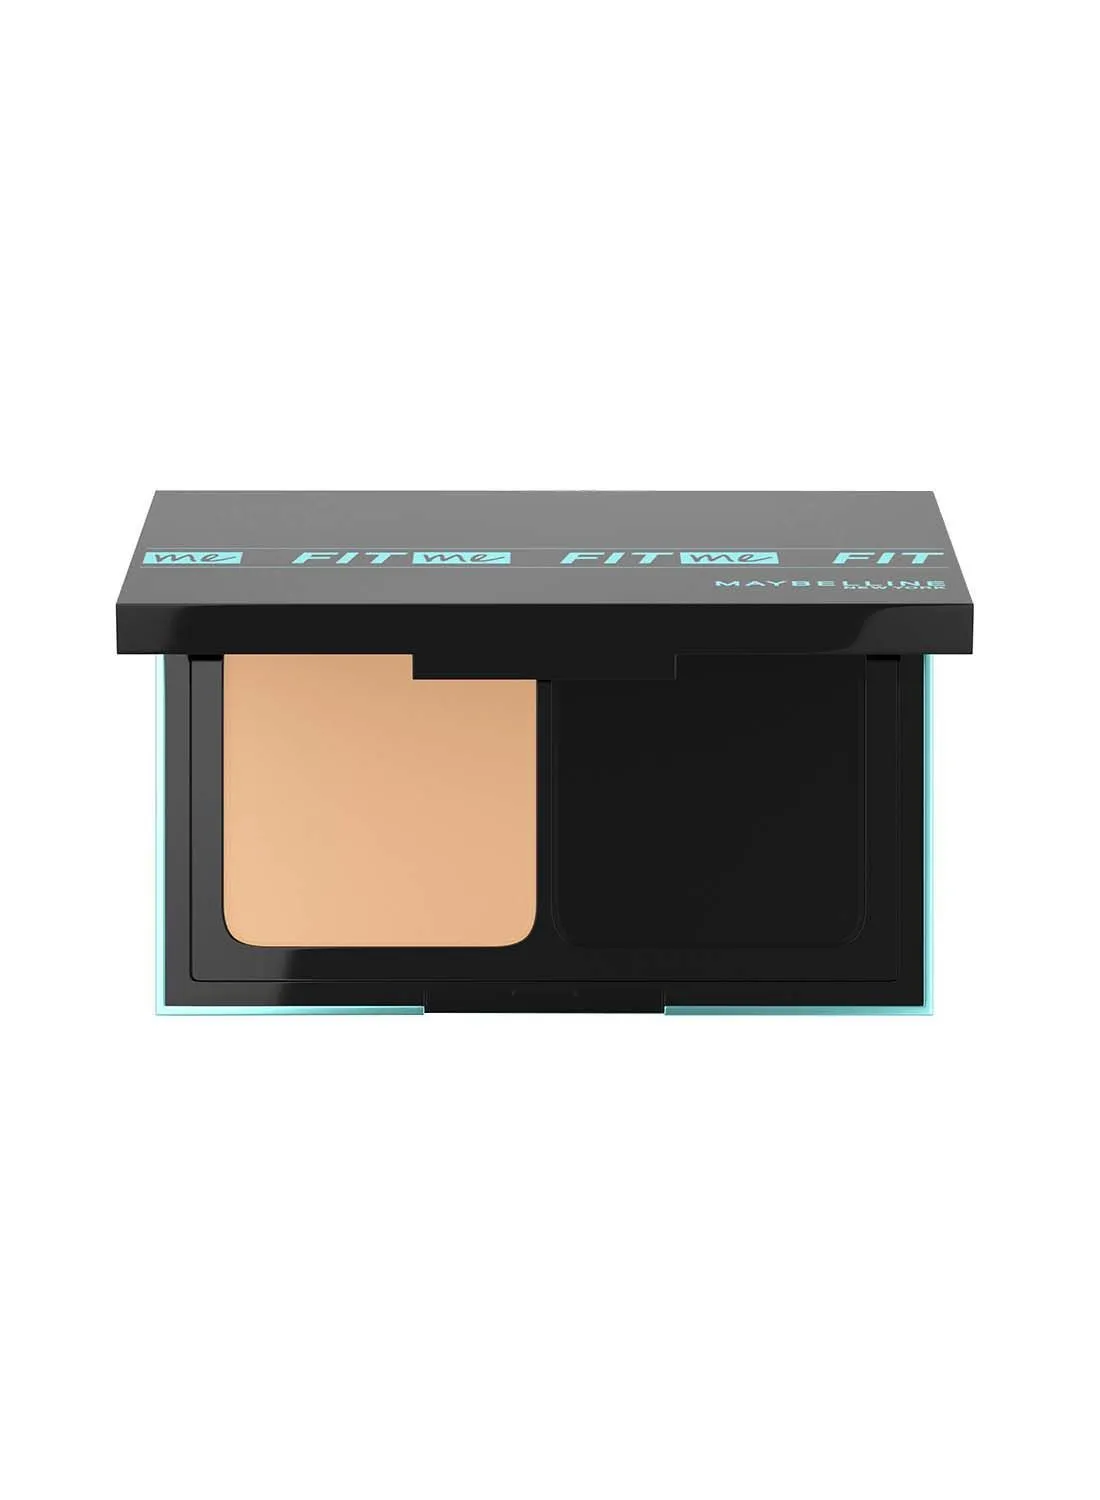 MAYBELLINE NEW YORK Maybelline New York, Fit Me foundation in a powder 123 Soft Nude